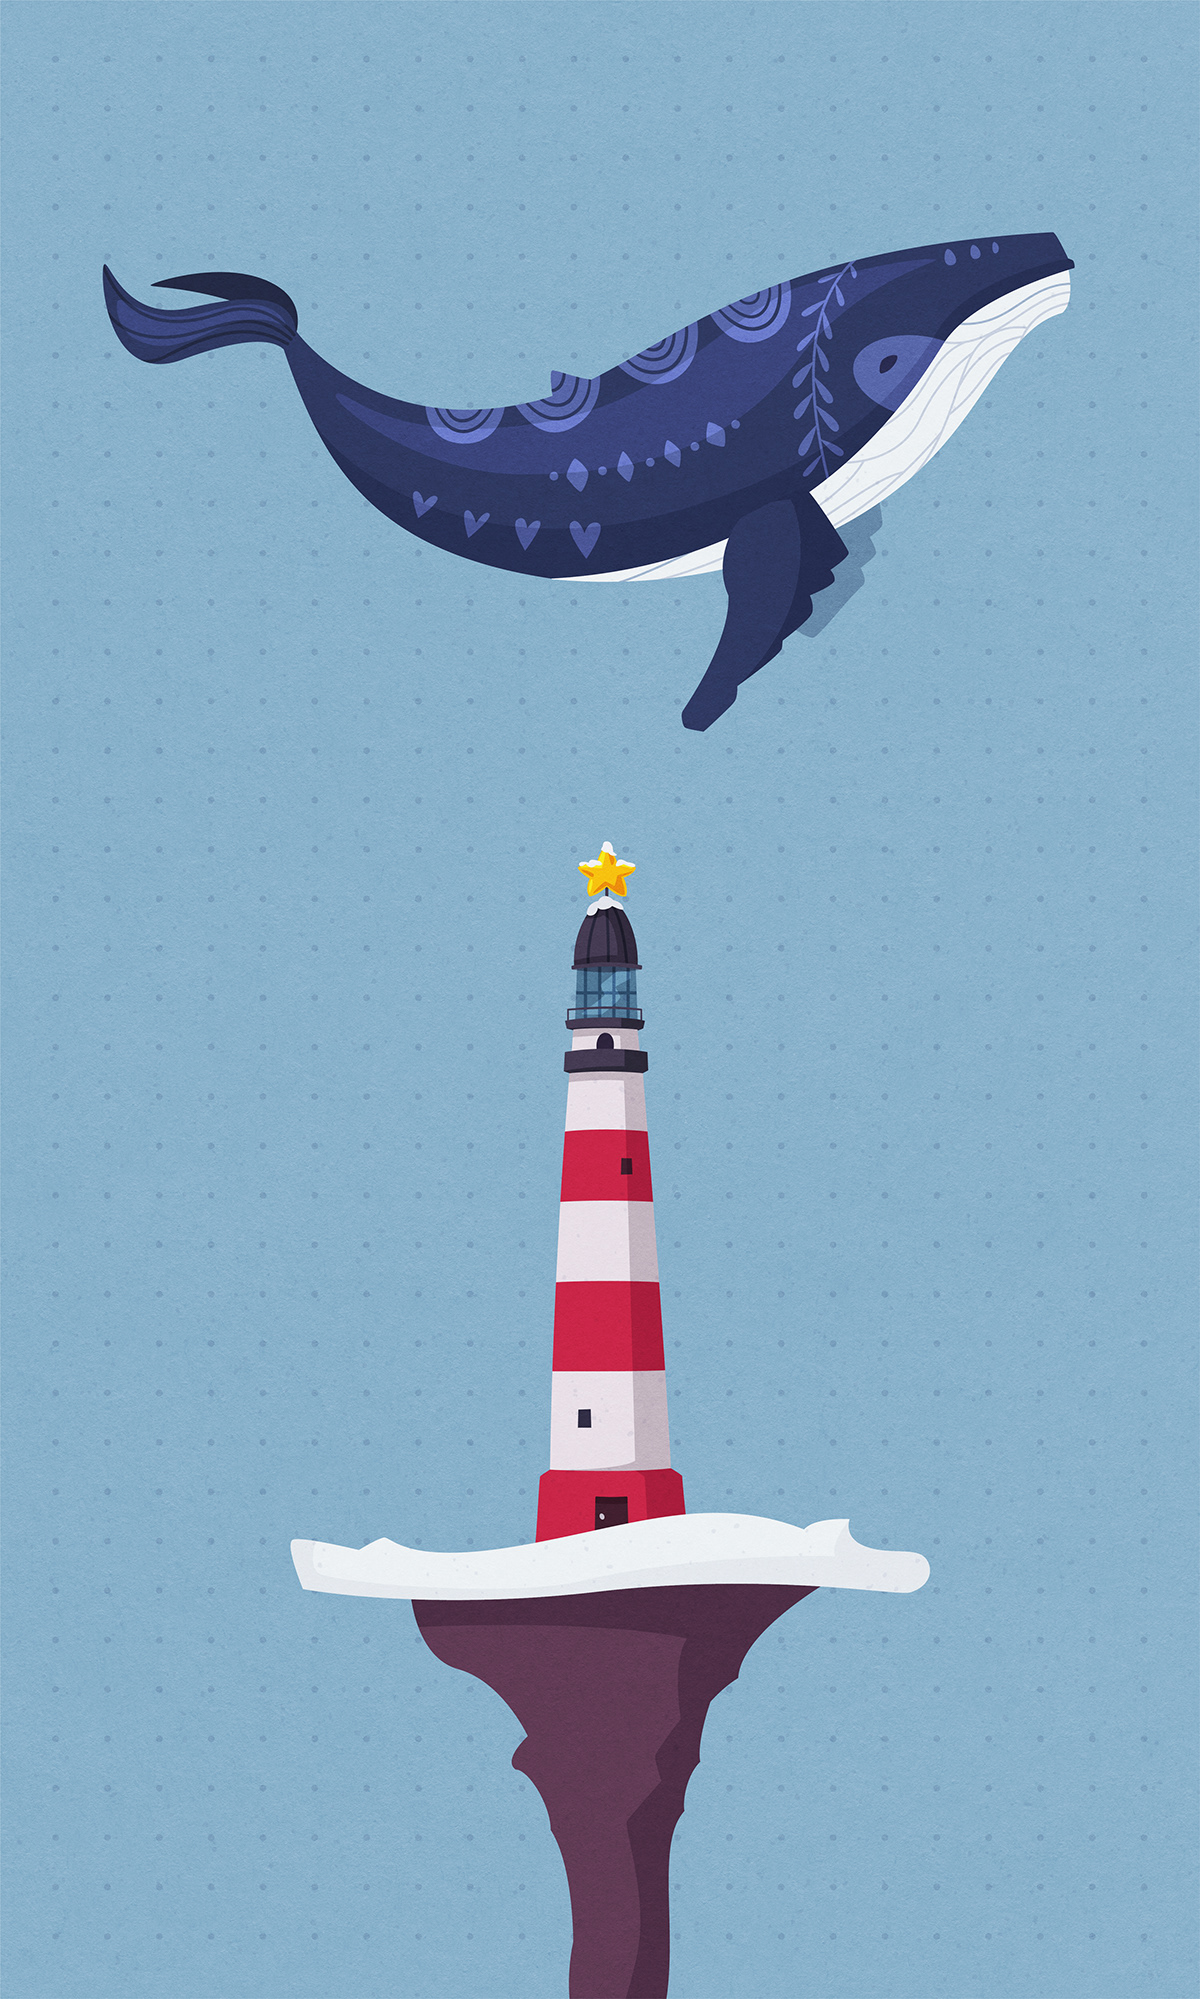 Whale sea Christmas winter lighthouse underwater snow holidays